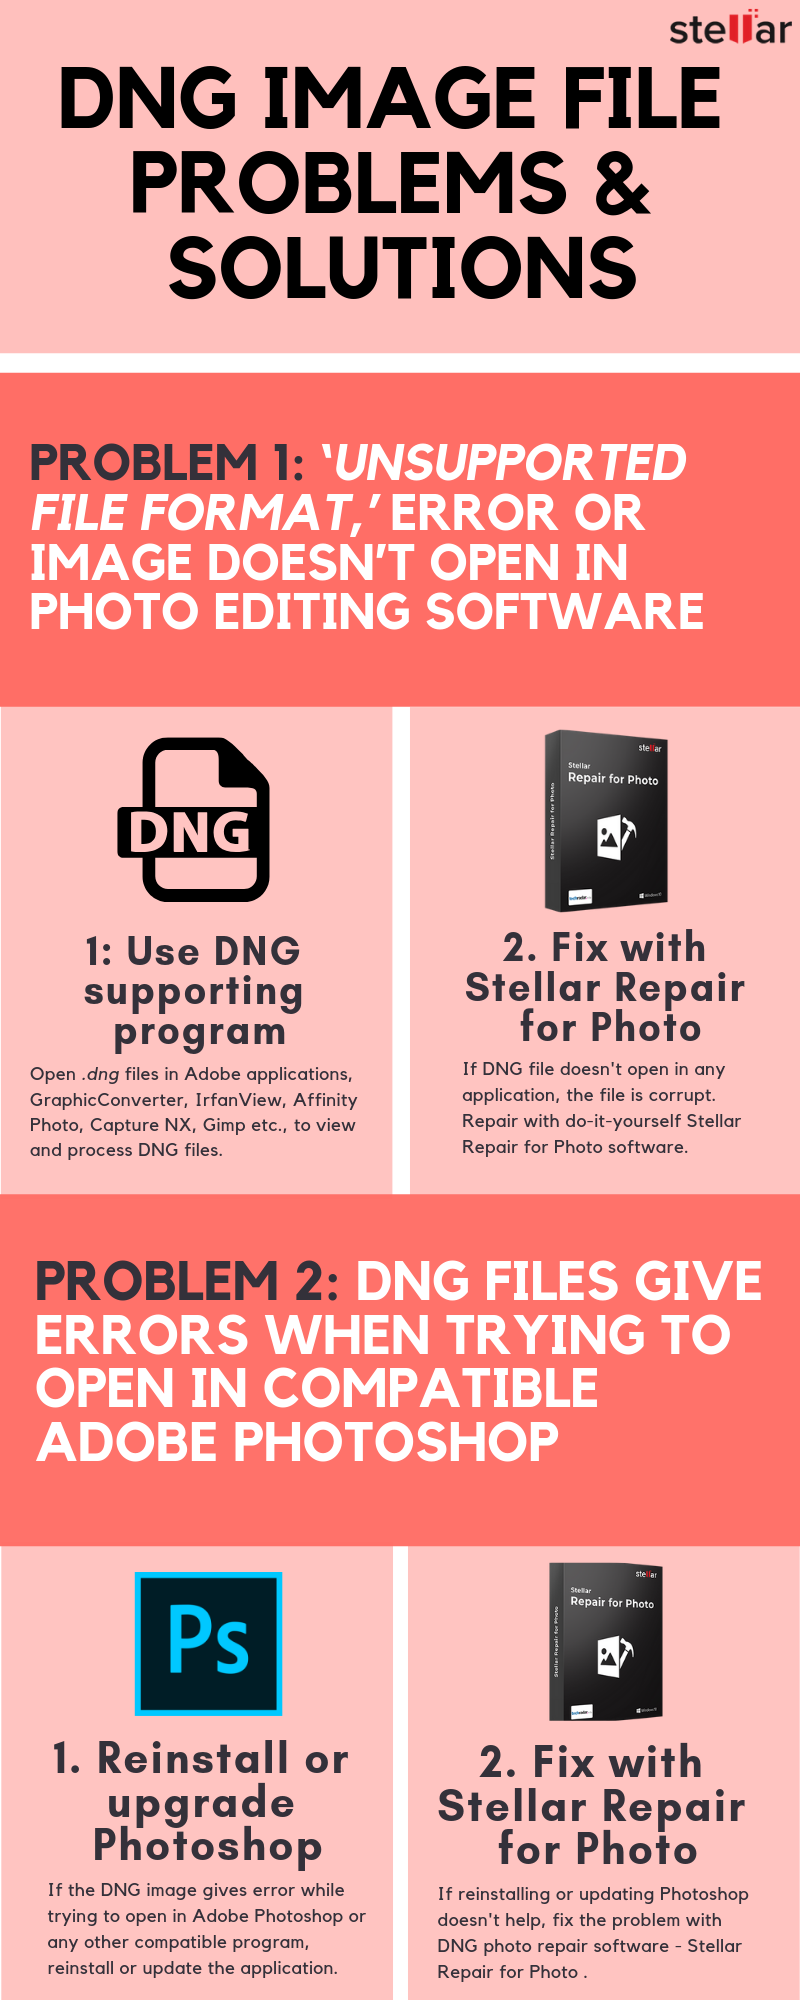 convert dng to jpg in photoshop elements